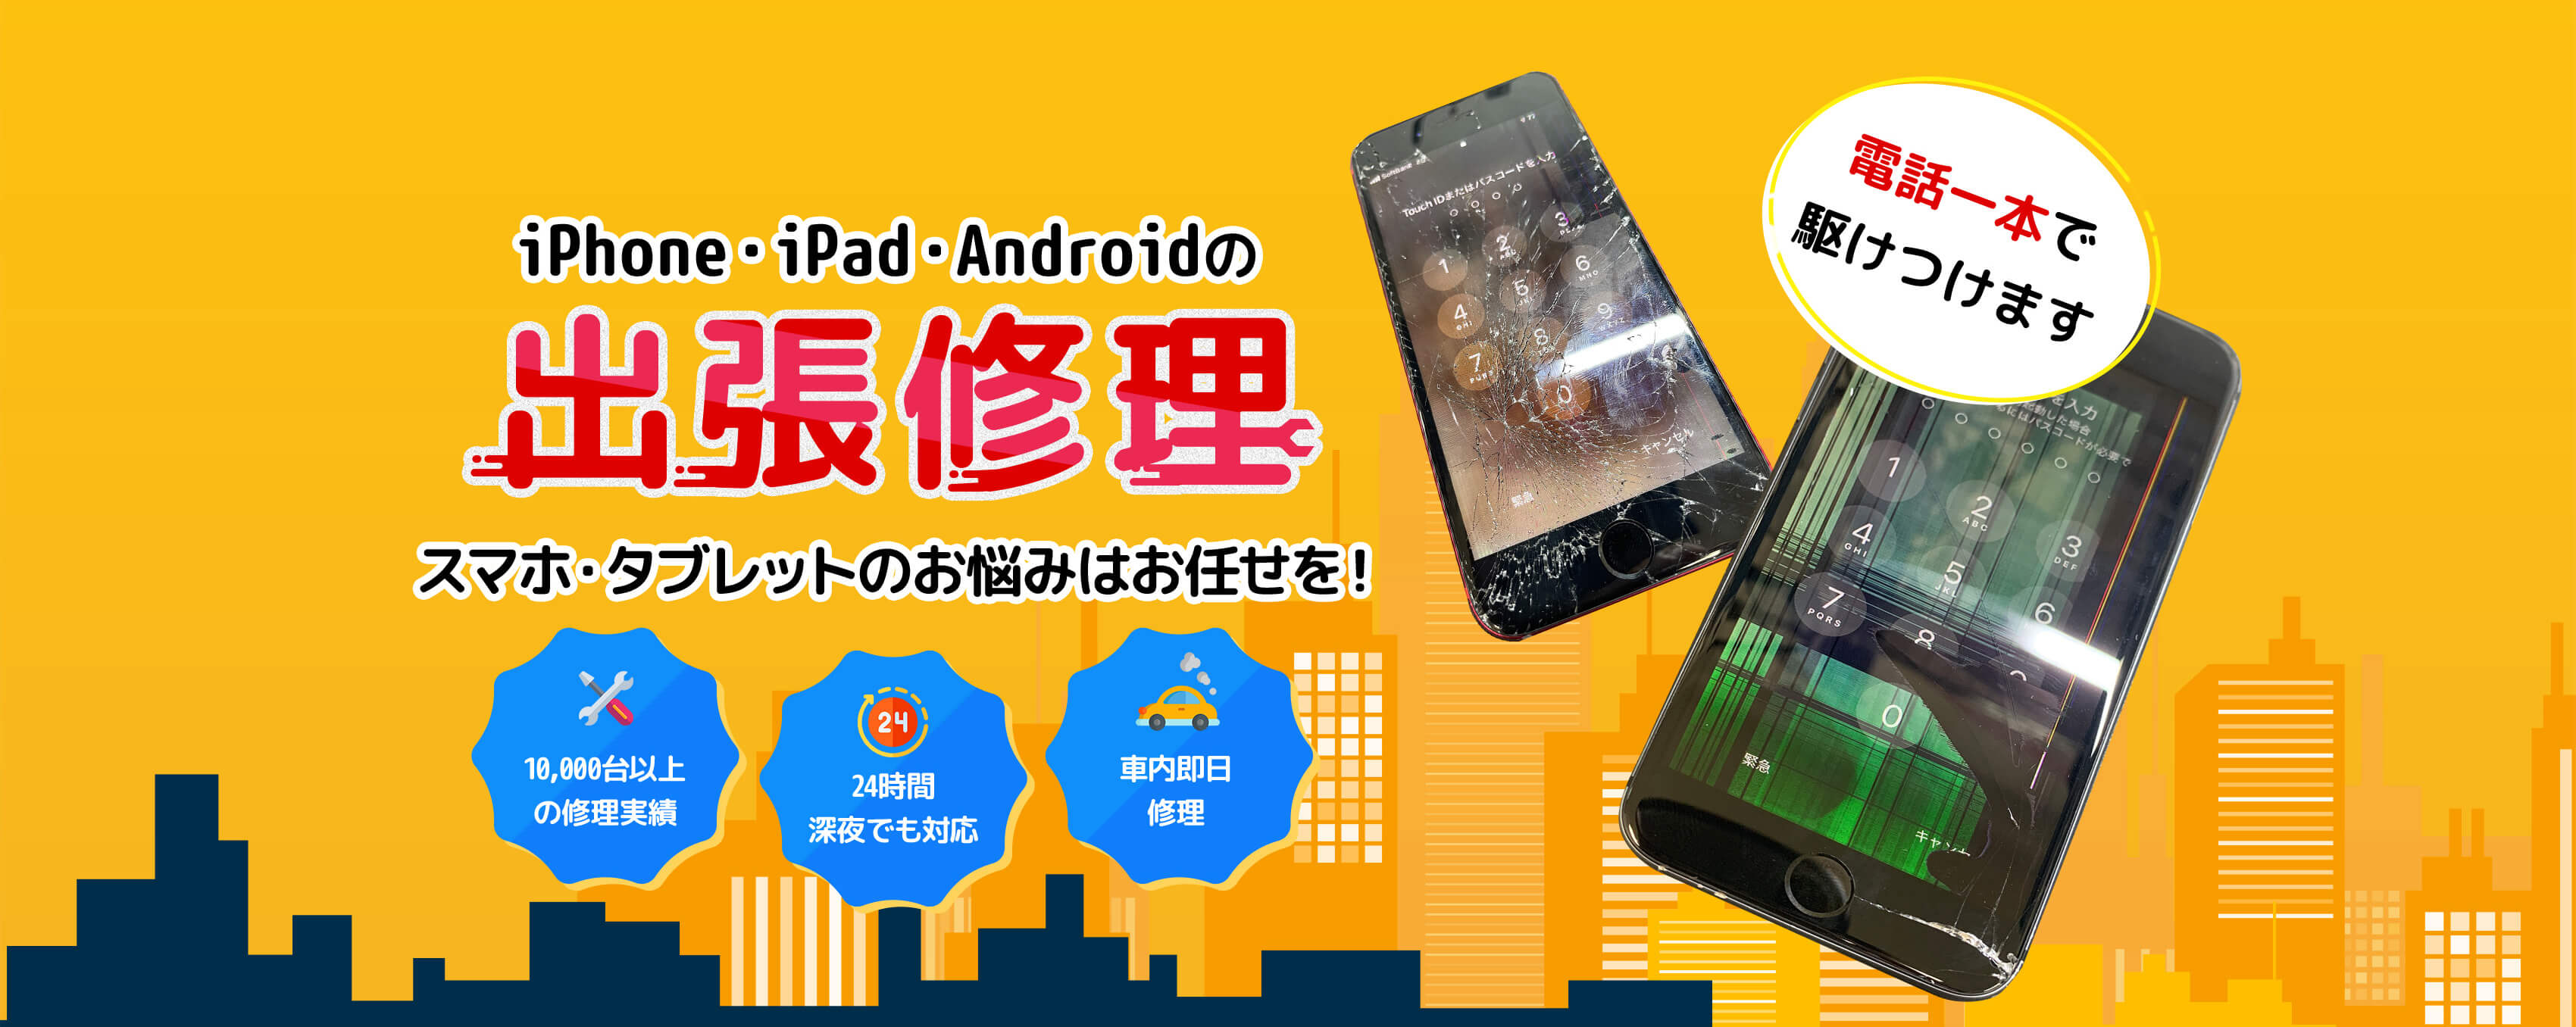 iPhone,Androidのスマホタブレット修理ならスマホレスキューゴーリペアの加盟店